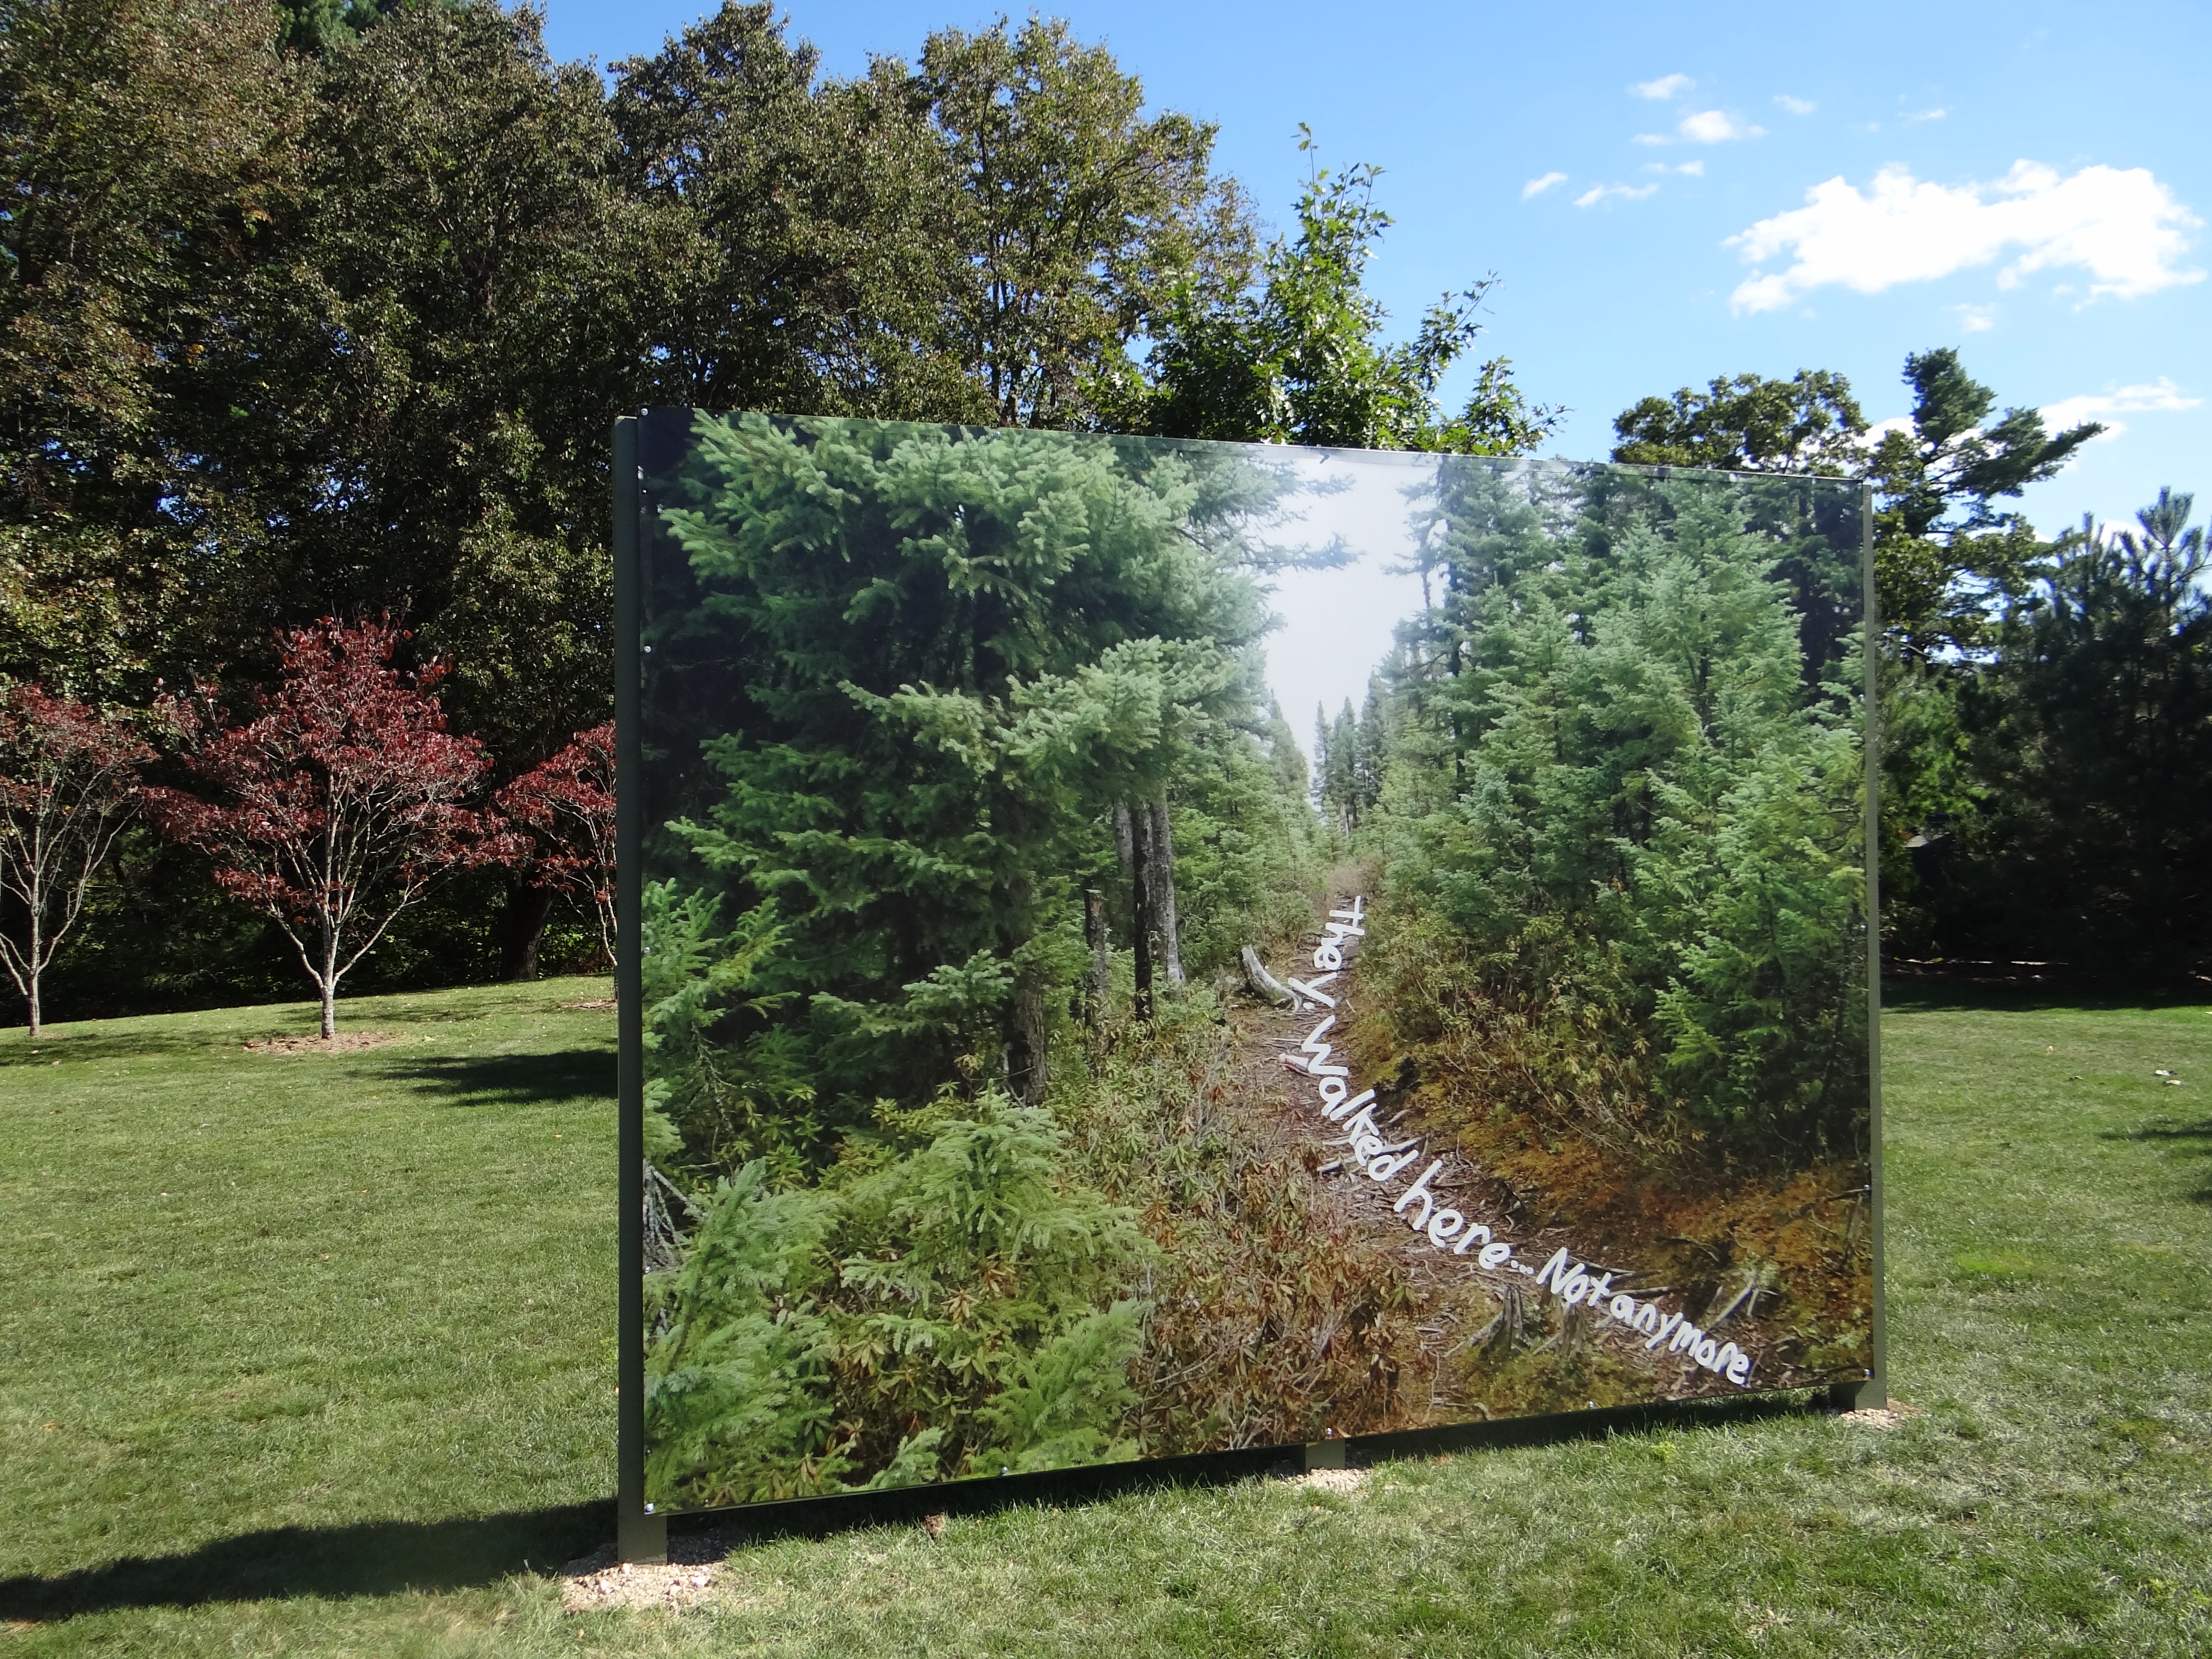 This large format printed vinyl is installed outdoors as part of larger exhibition.